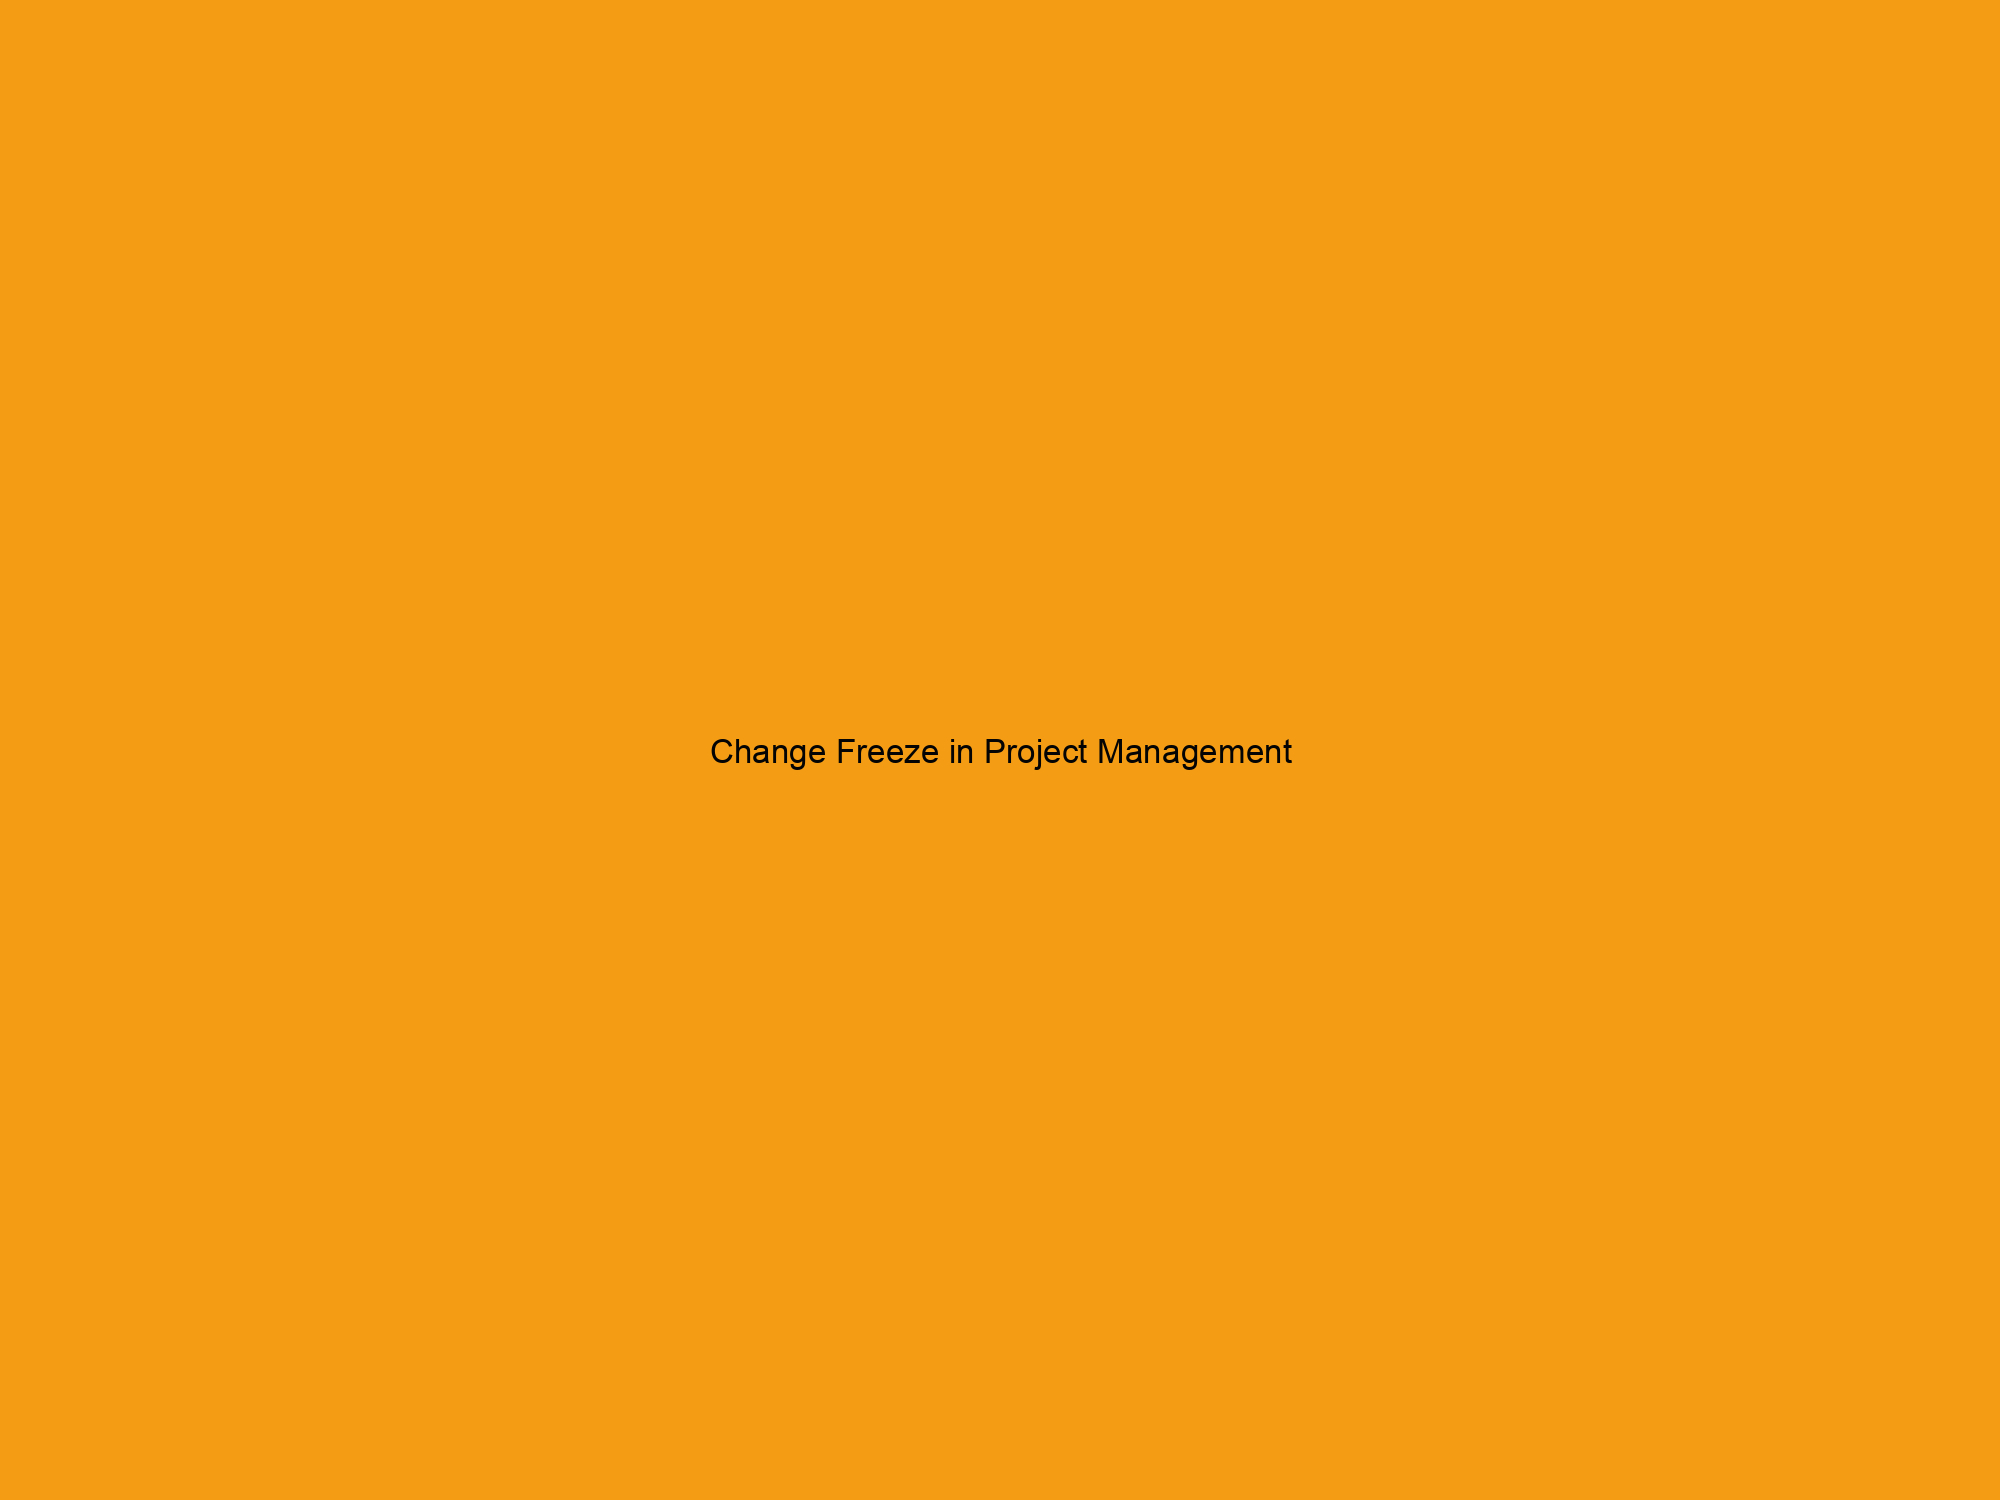 Change Freeze in Project Management